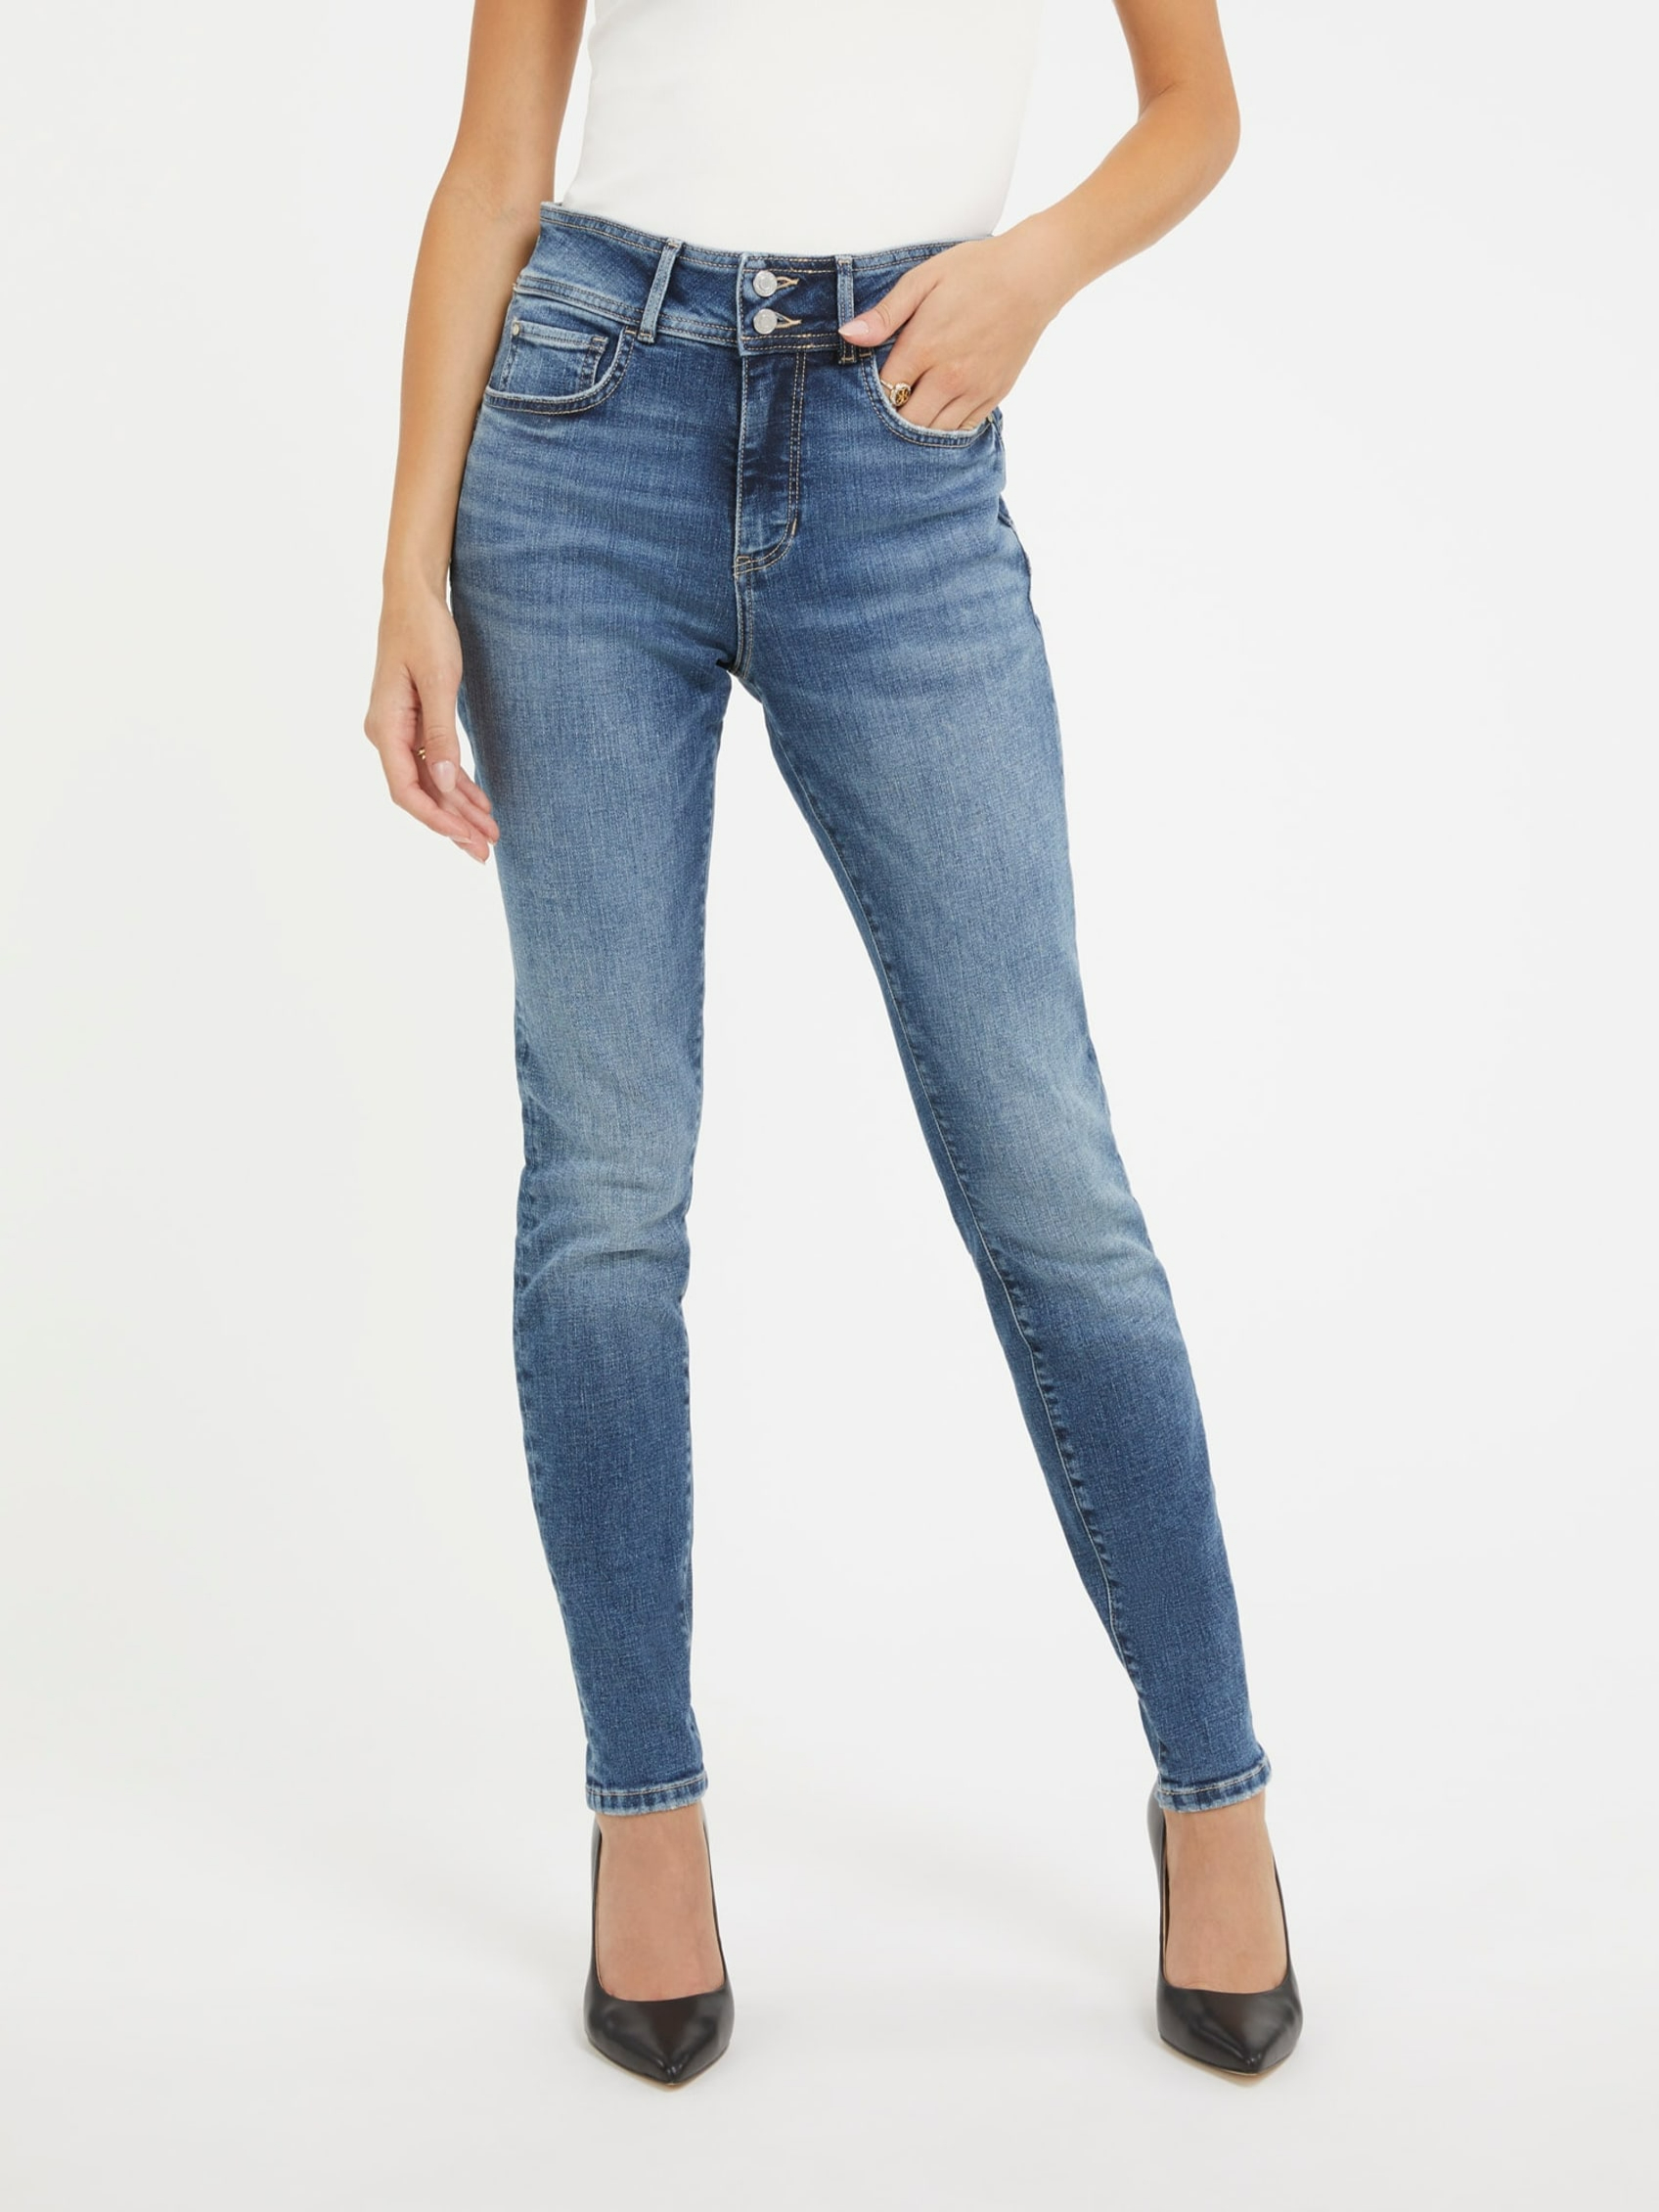 ECO SHAPE UP SKINNY DENIM PANTS | Guess Philippines